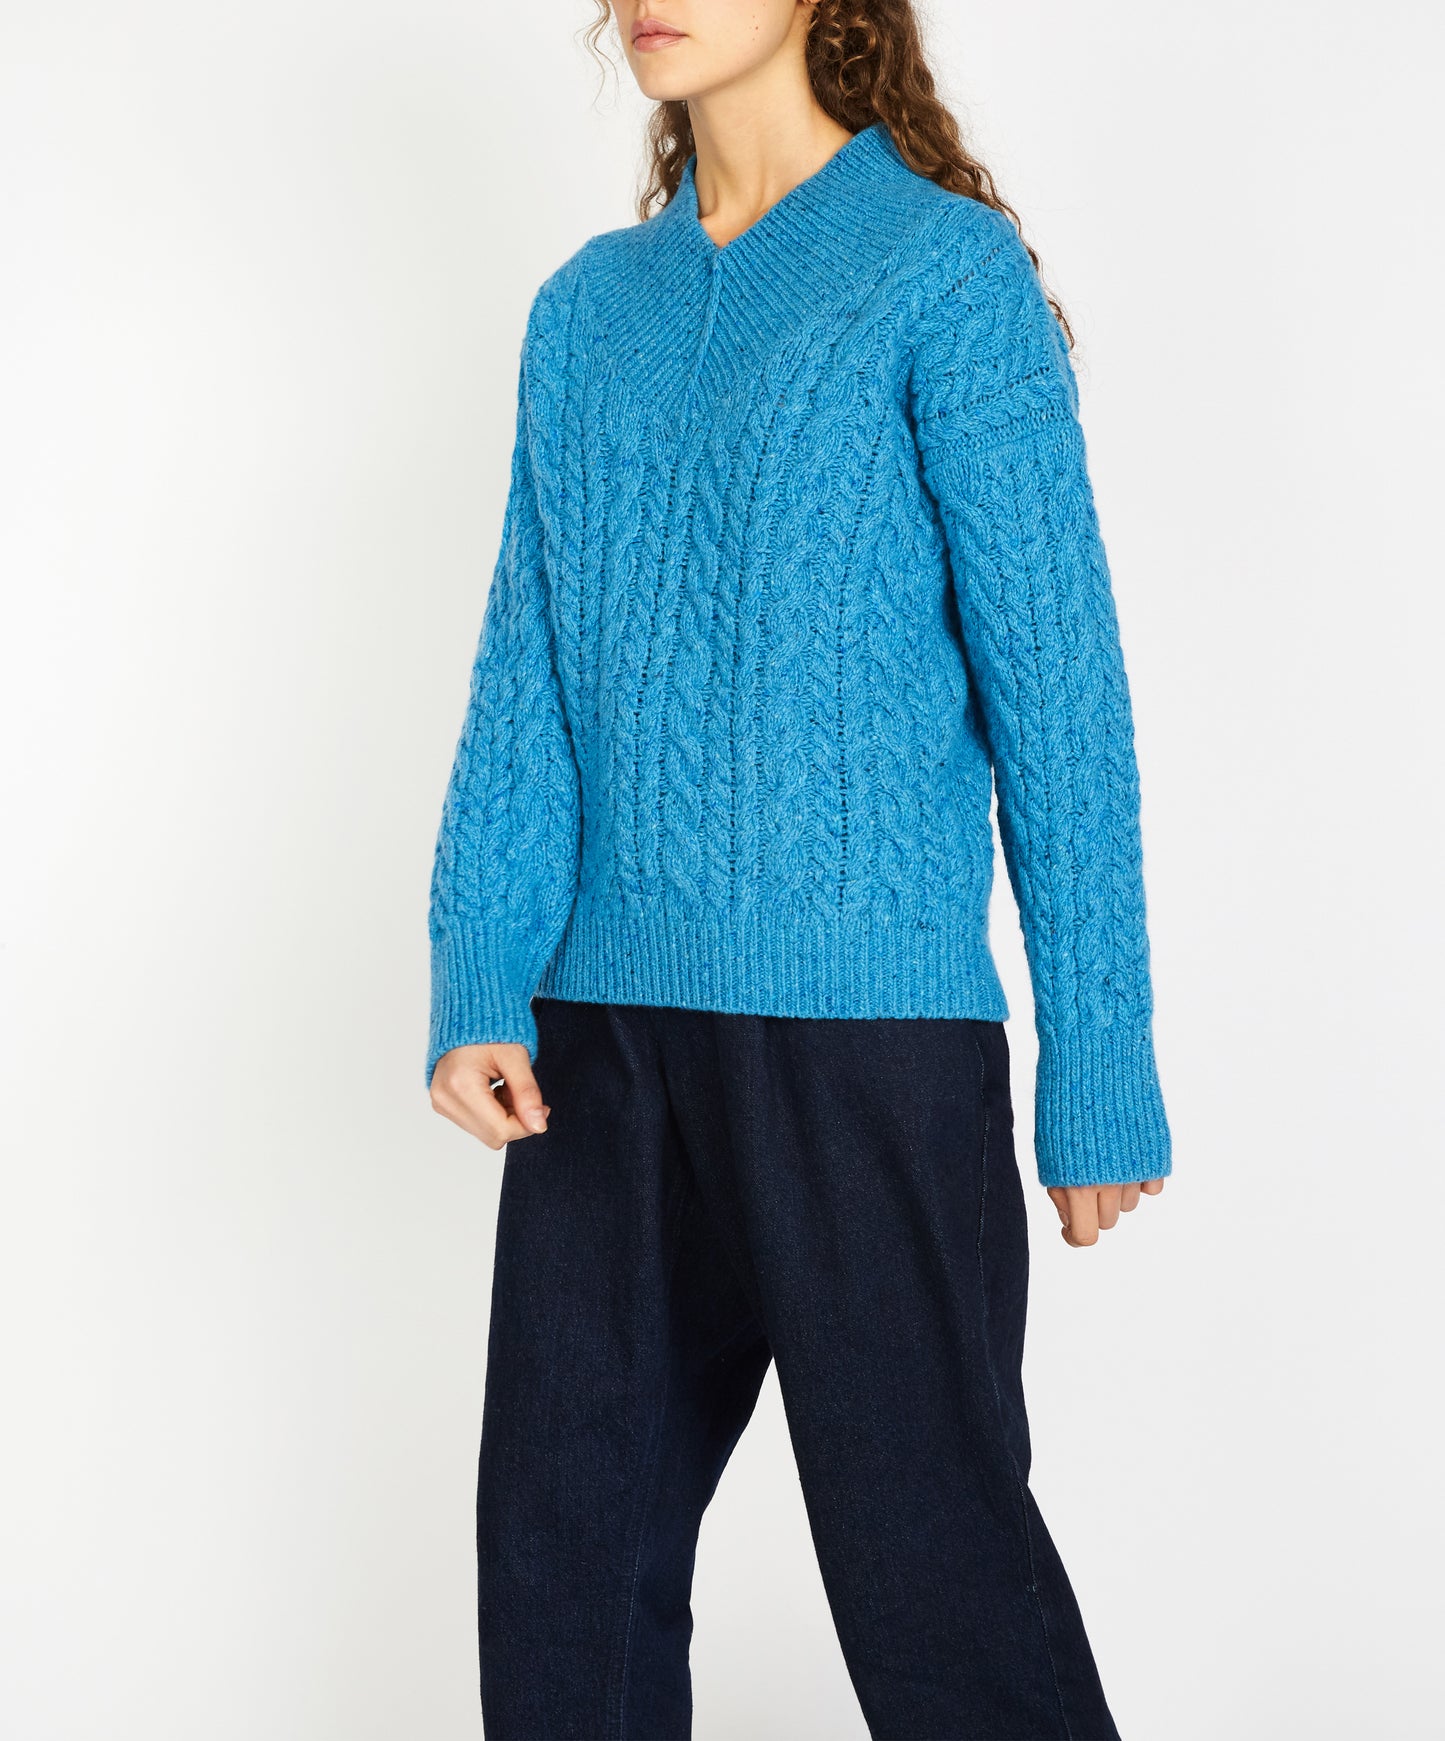 IrelandsEye Knitwear Mill Lane Cable V-neck Sweater Forget-Me-Not Blue